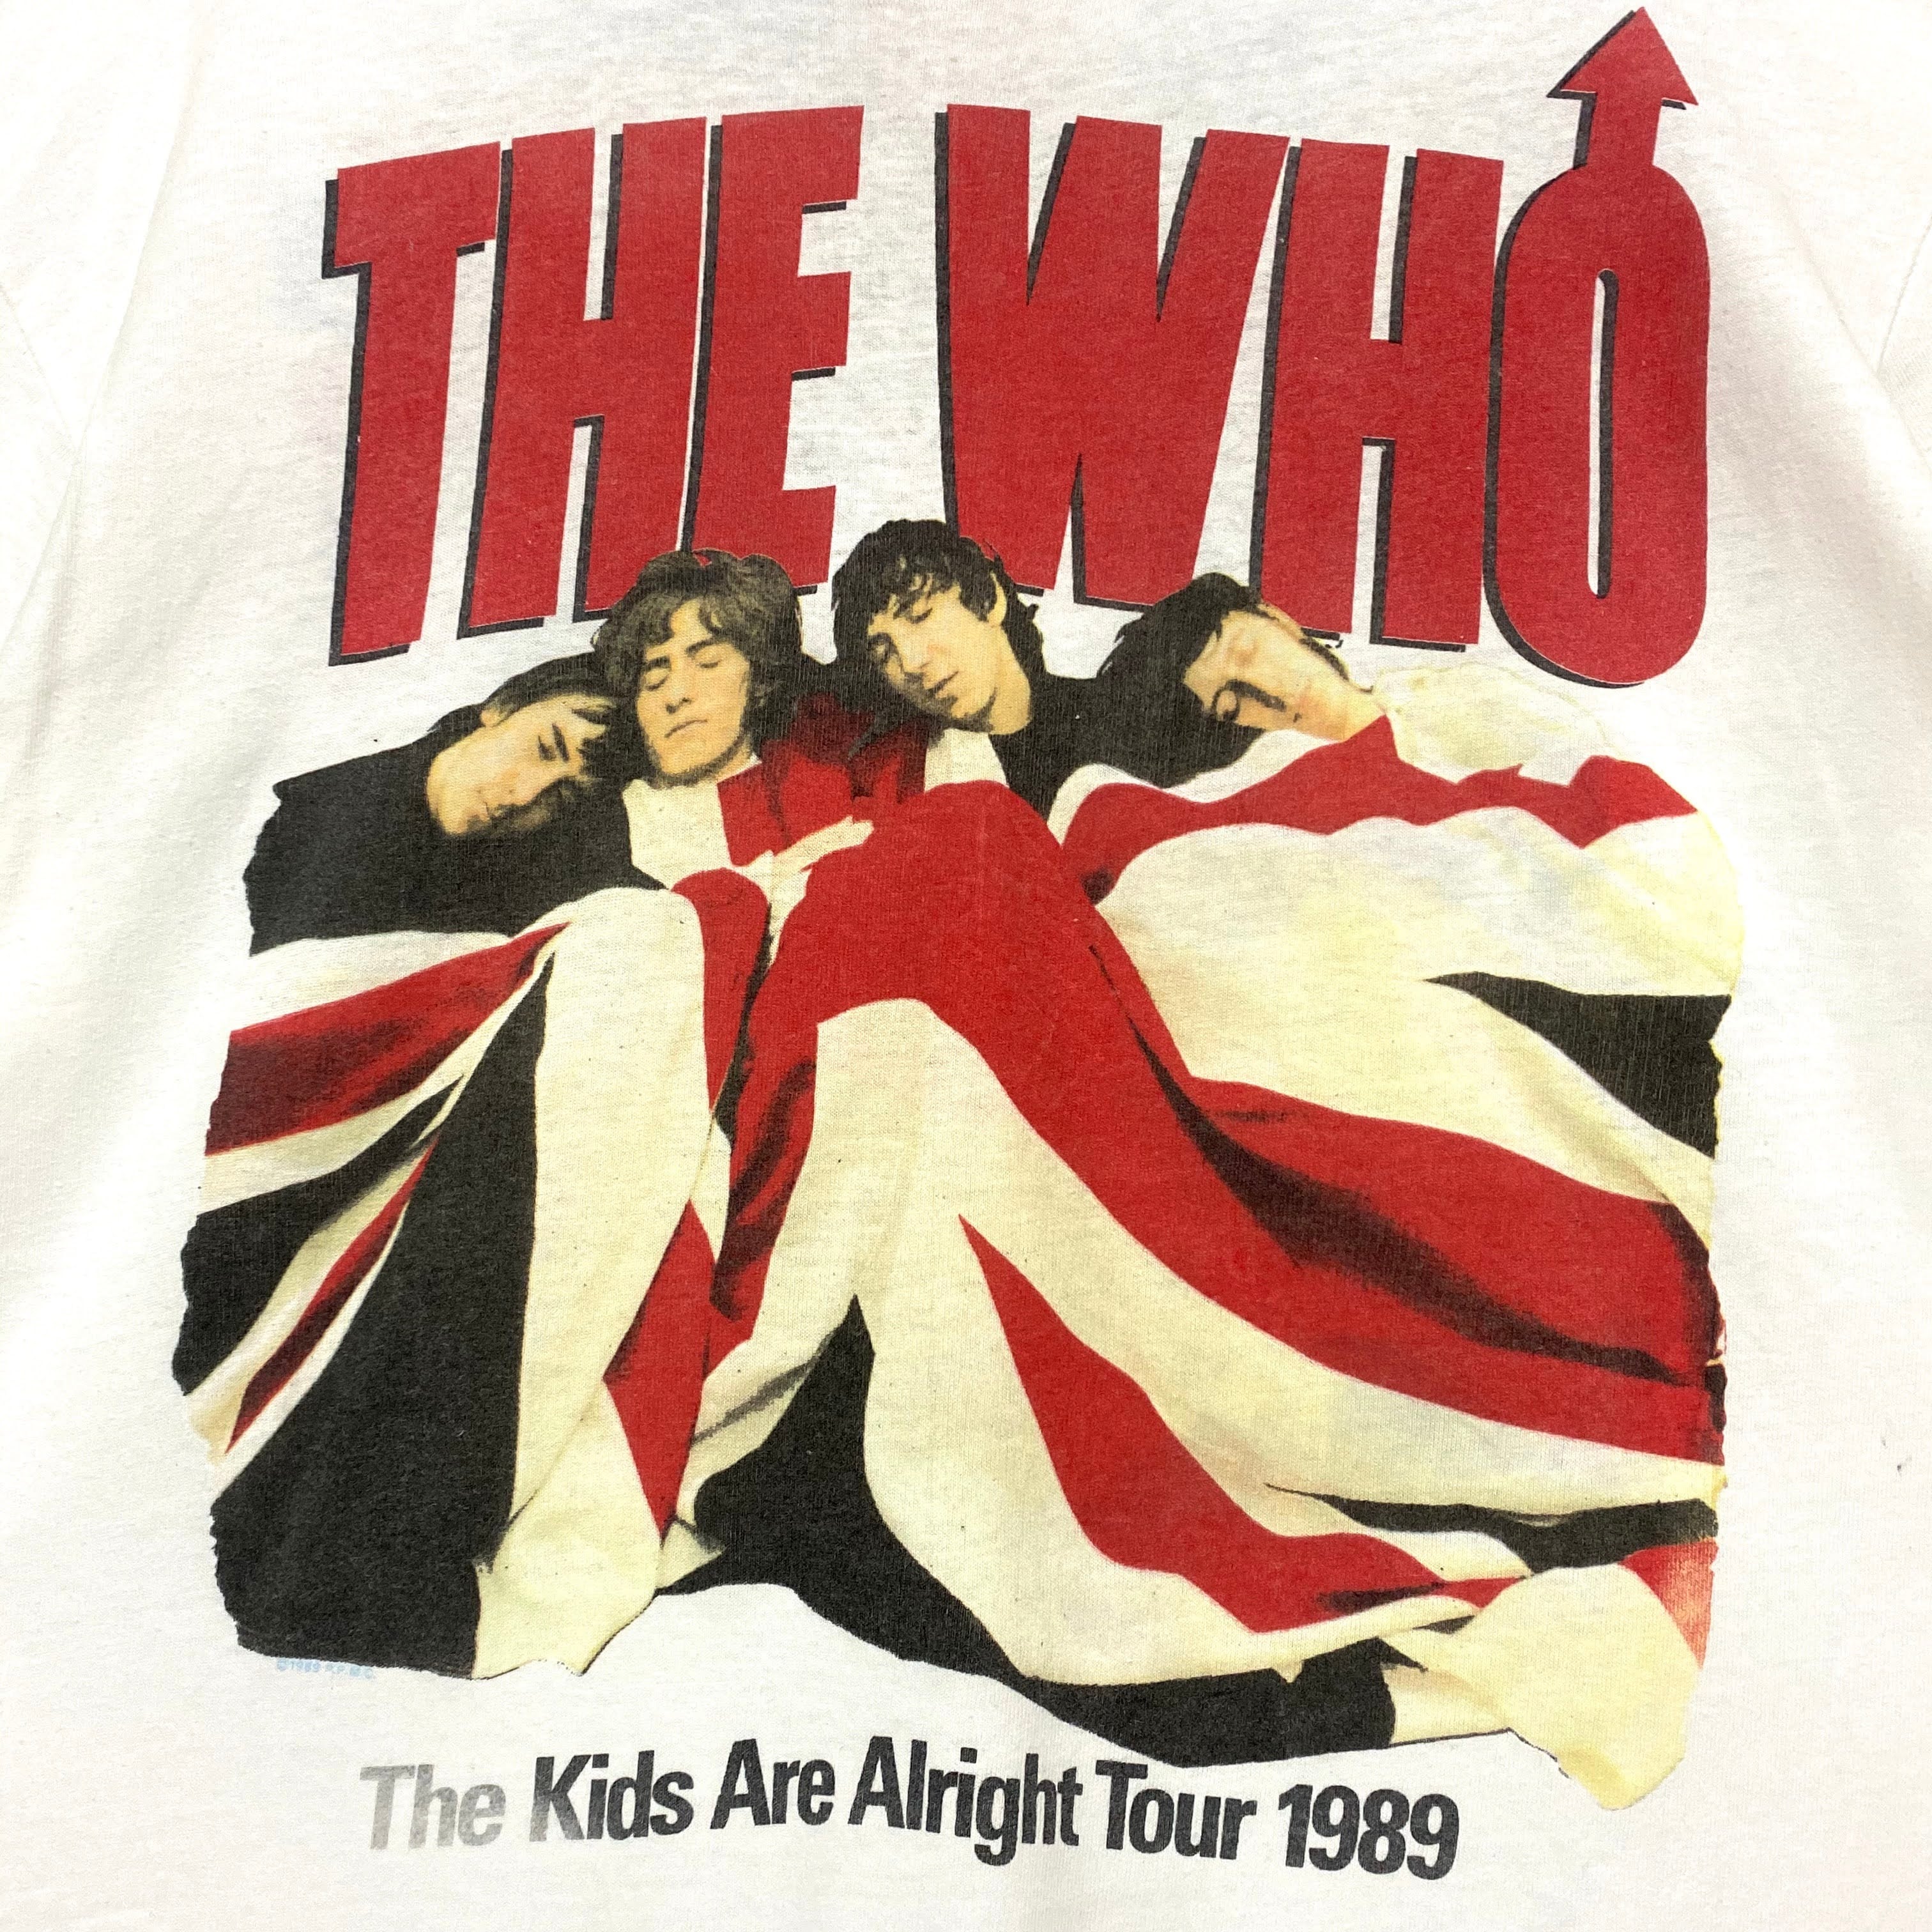 80s THE WHO The Kids Are Alright Tour 1989 ザ フー クルーネック 半袖 Tシャツ Hanesボディ / USA製 ホワイト 白 L 80年代  トップス カットソー バンドT ロックT アーティストT Vintage Rock Item ヴィンテージロック 【メンズ】